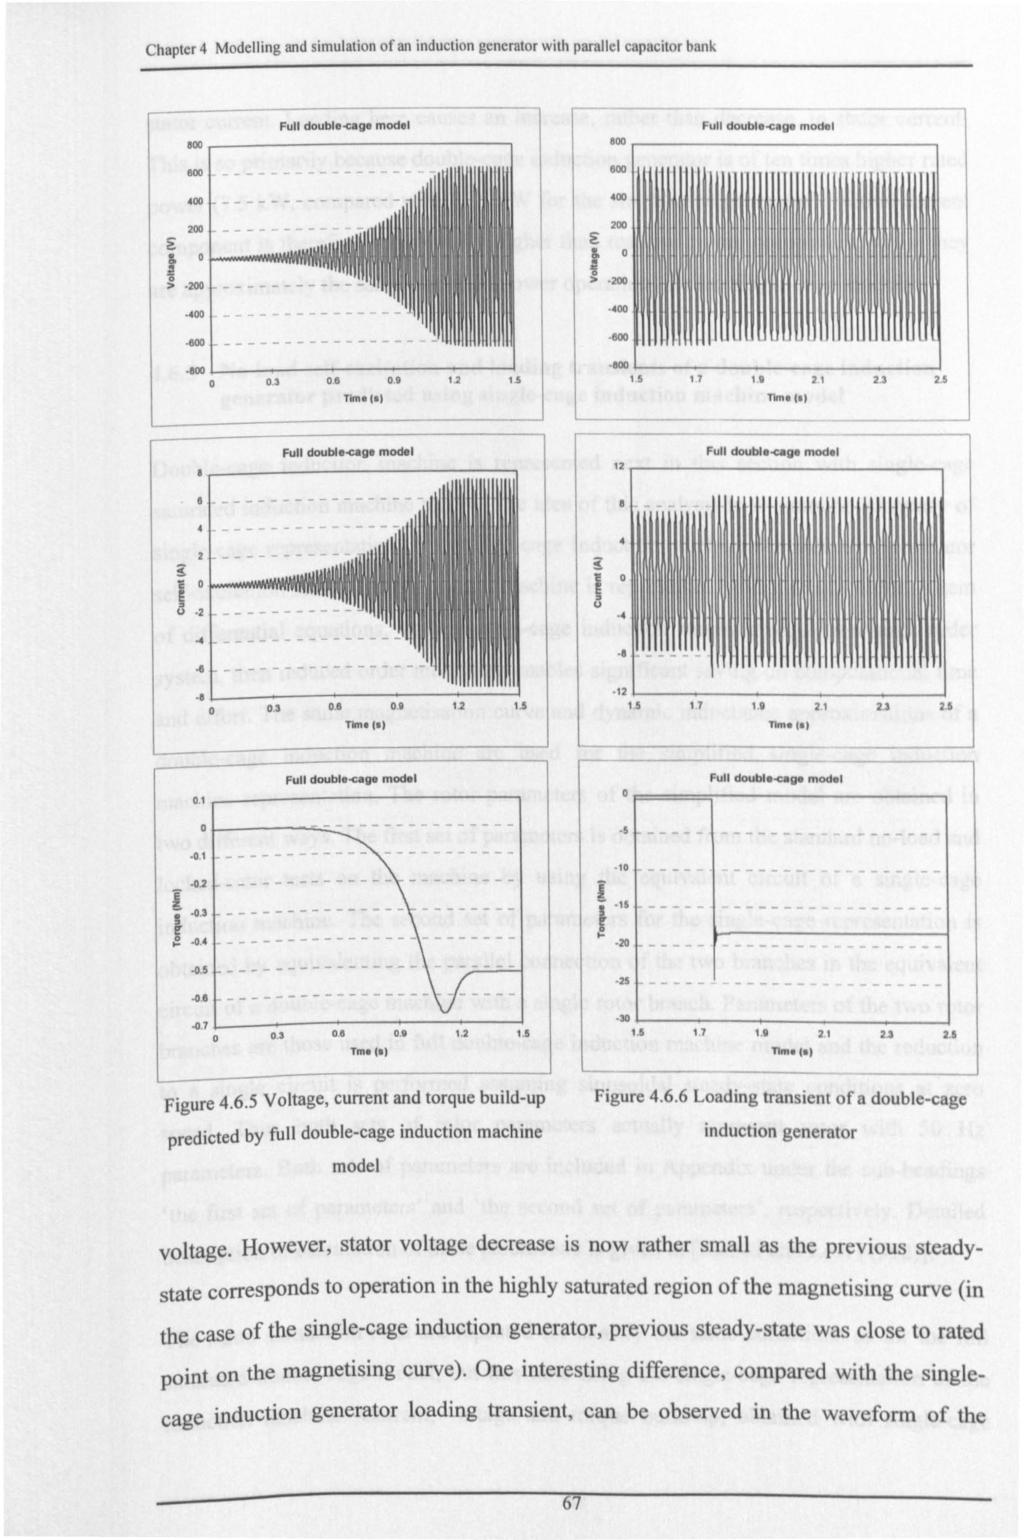 Chapter 4 Modelling and simulation of an induction generator with parallel capacitor bank eoo Full doublecage model 800 Full doublatapa modal Boo BW E 400 200 >. 200-400 0.3 0.9 0.9 Tim. (s) i i 12 1.